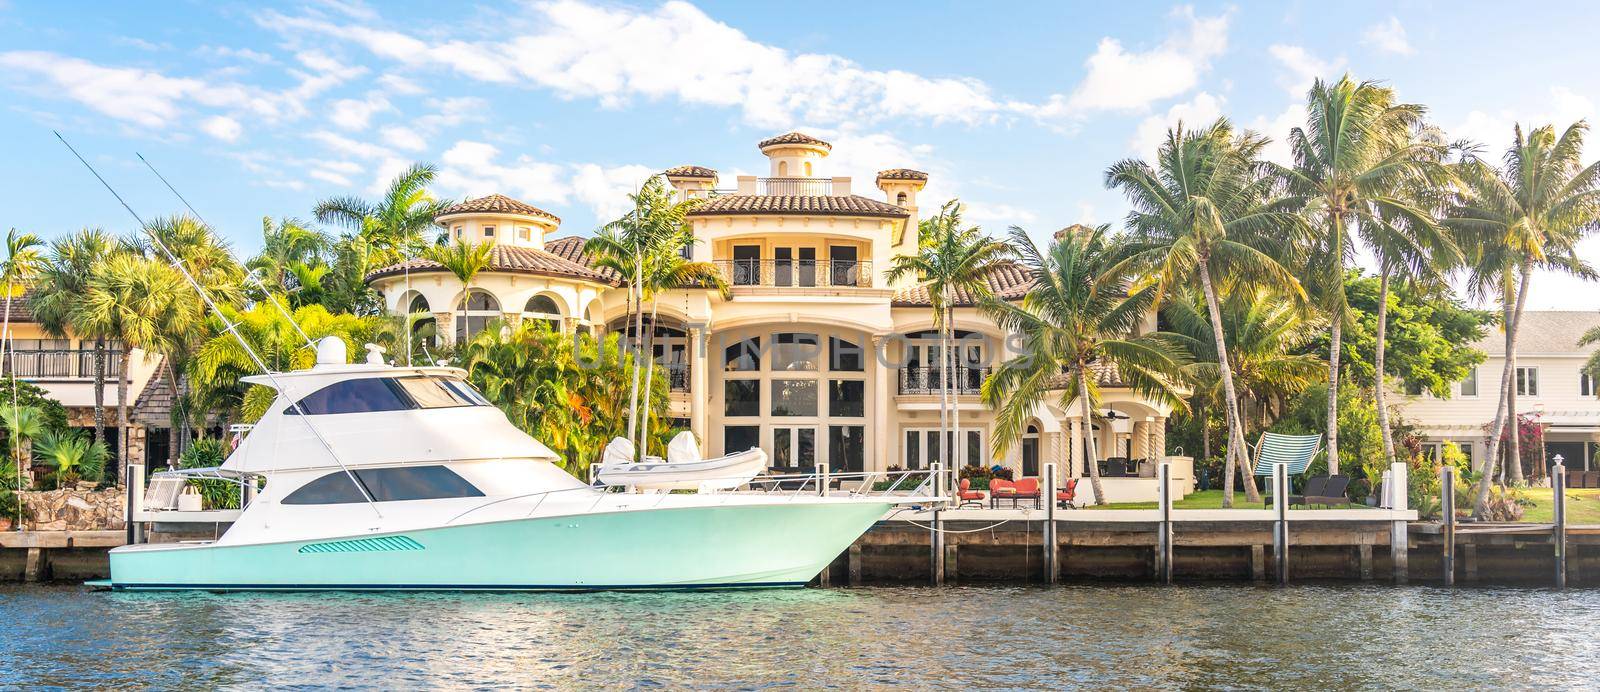 Luxury Waterfront house in Fort Lauderdale